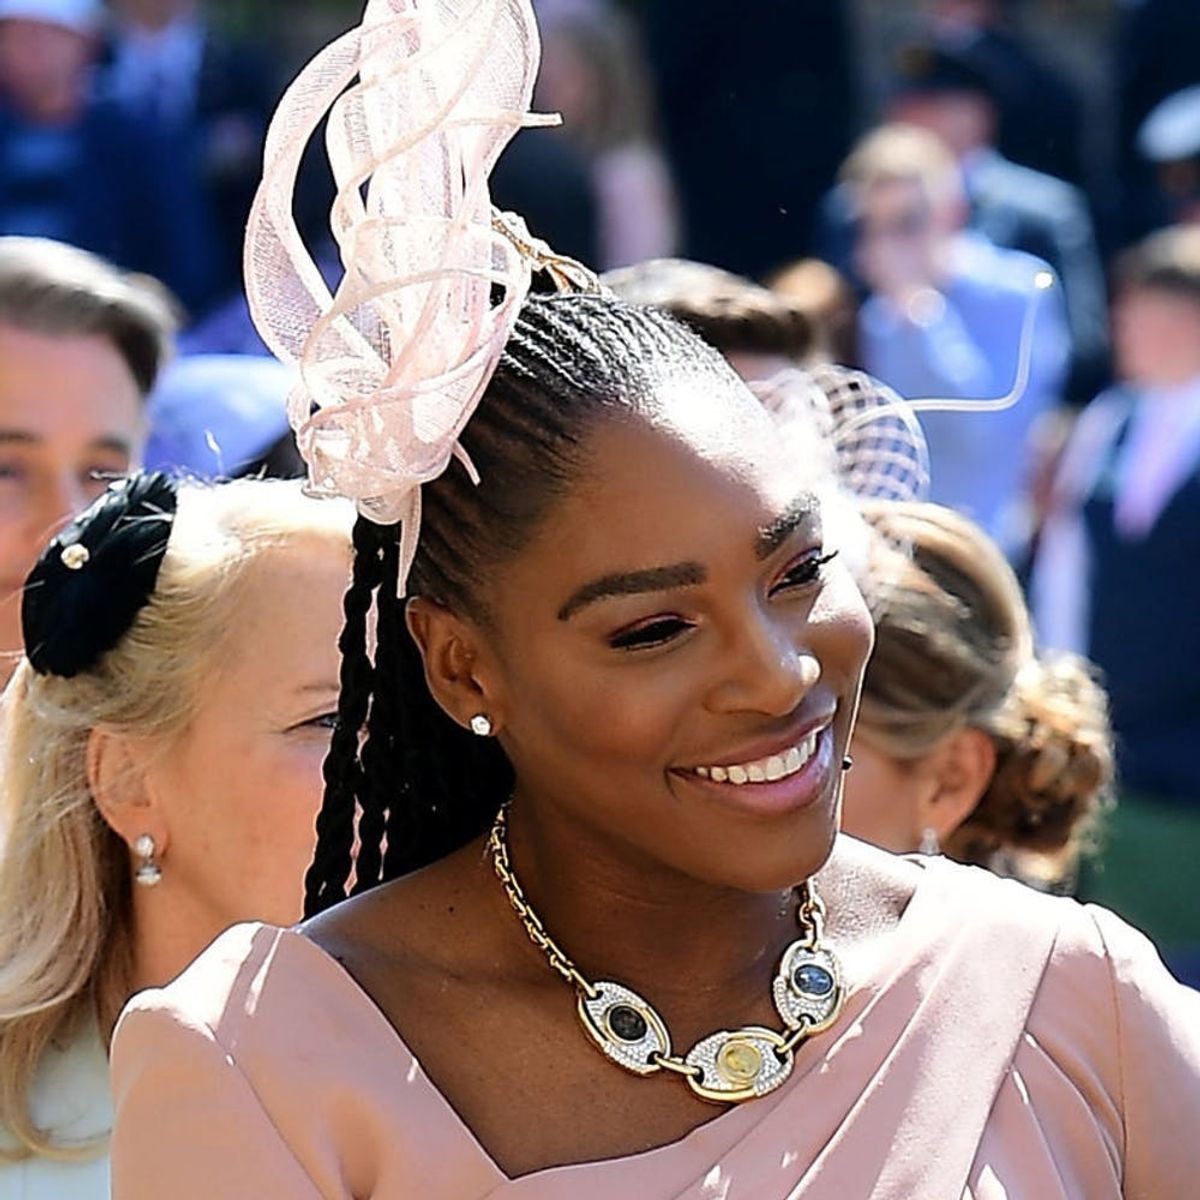 Serena Williams Wears Sneakers to the Royal Wedding Reception